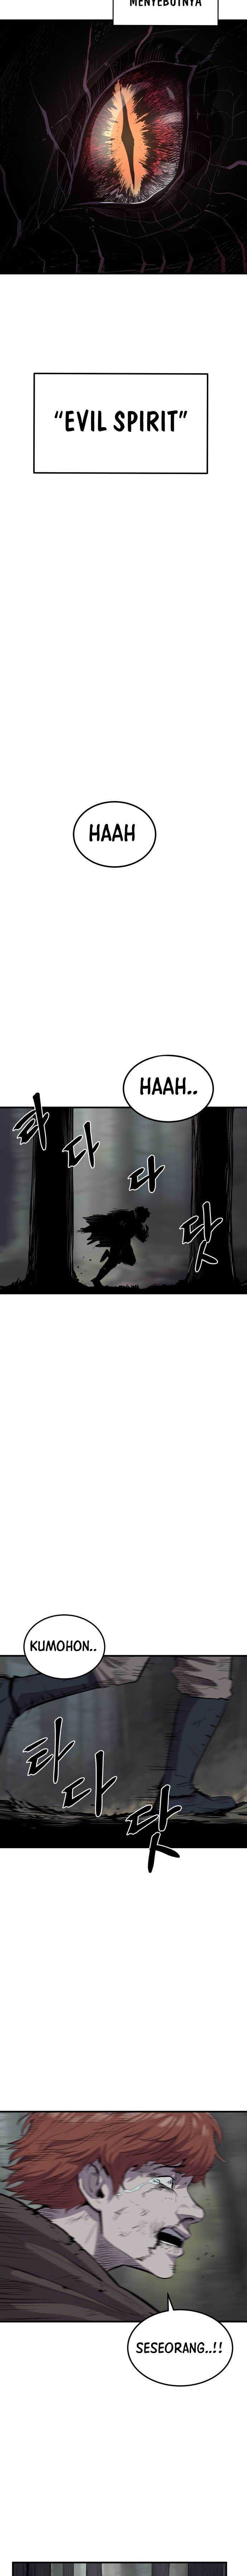 Howling Dragon (The Wailing Perversion) Chapter 01